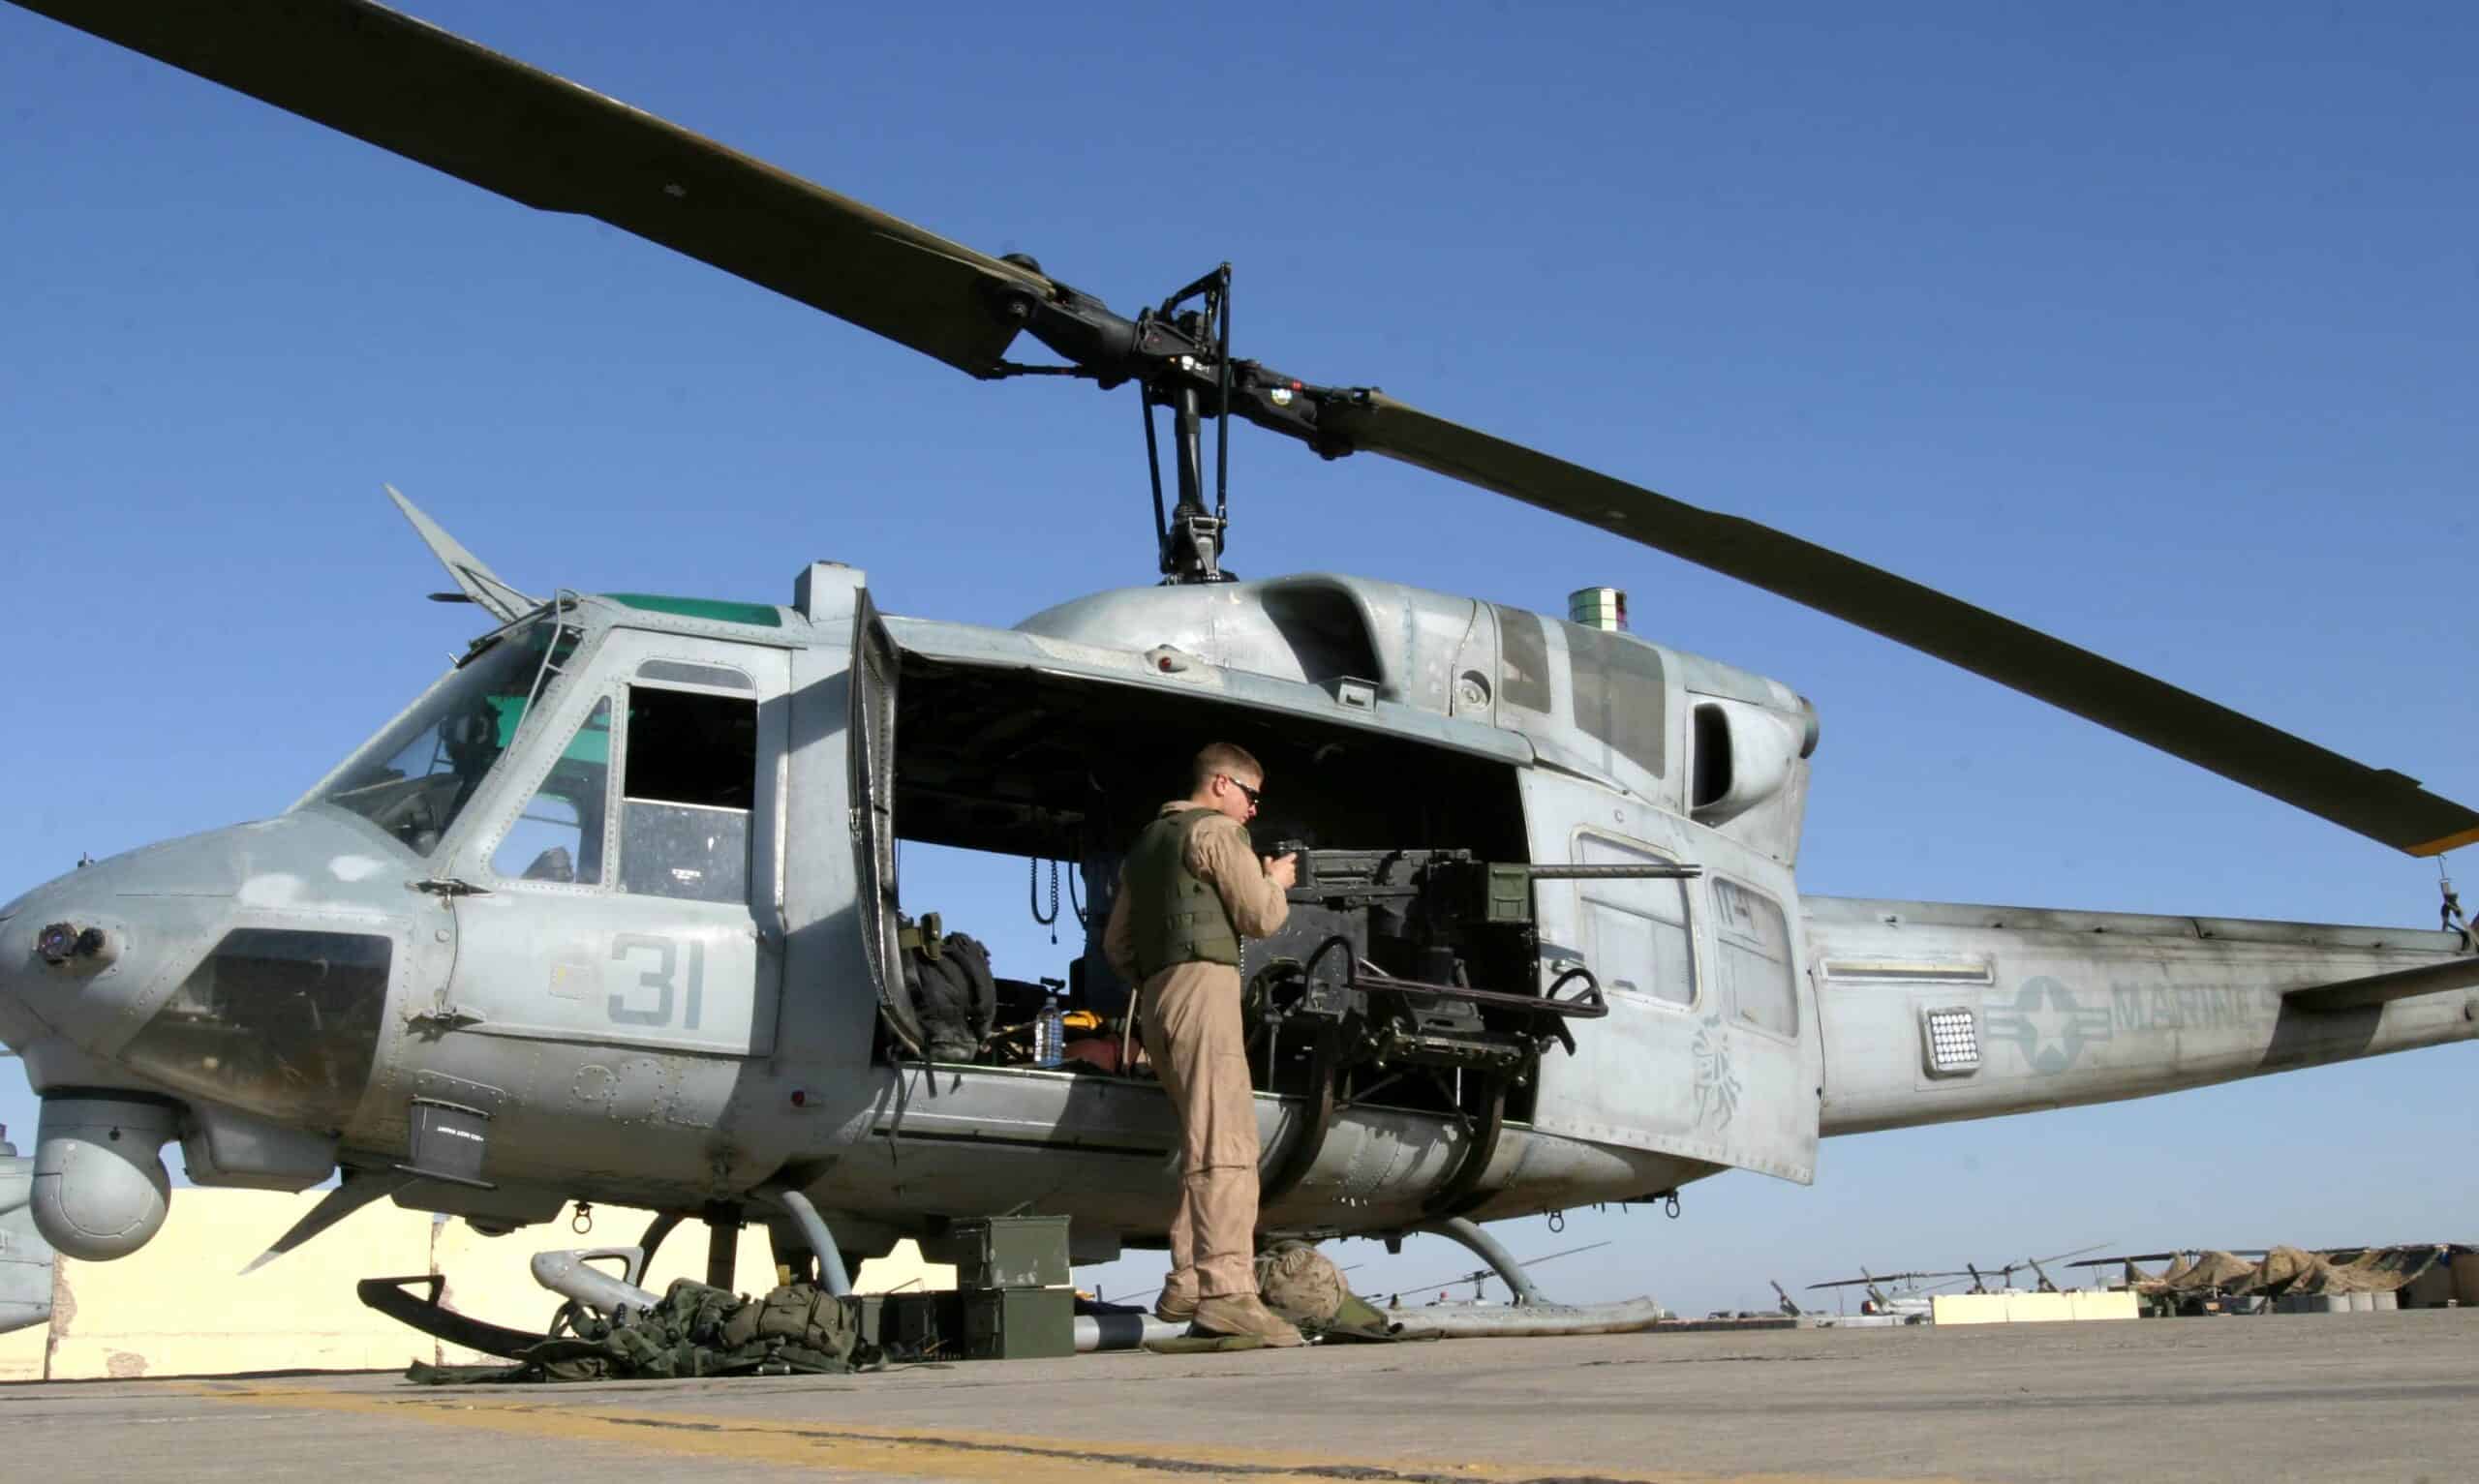 A Marine UH-1N Huey, similar to the one mentioned in the story. USMC photo by Lance Cpl. Scott L. Eberle.